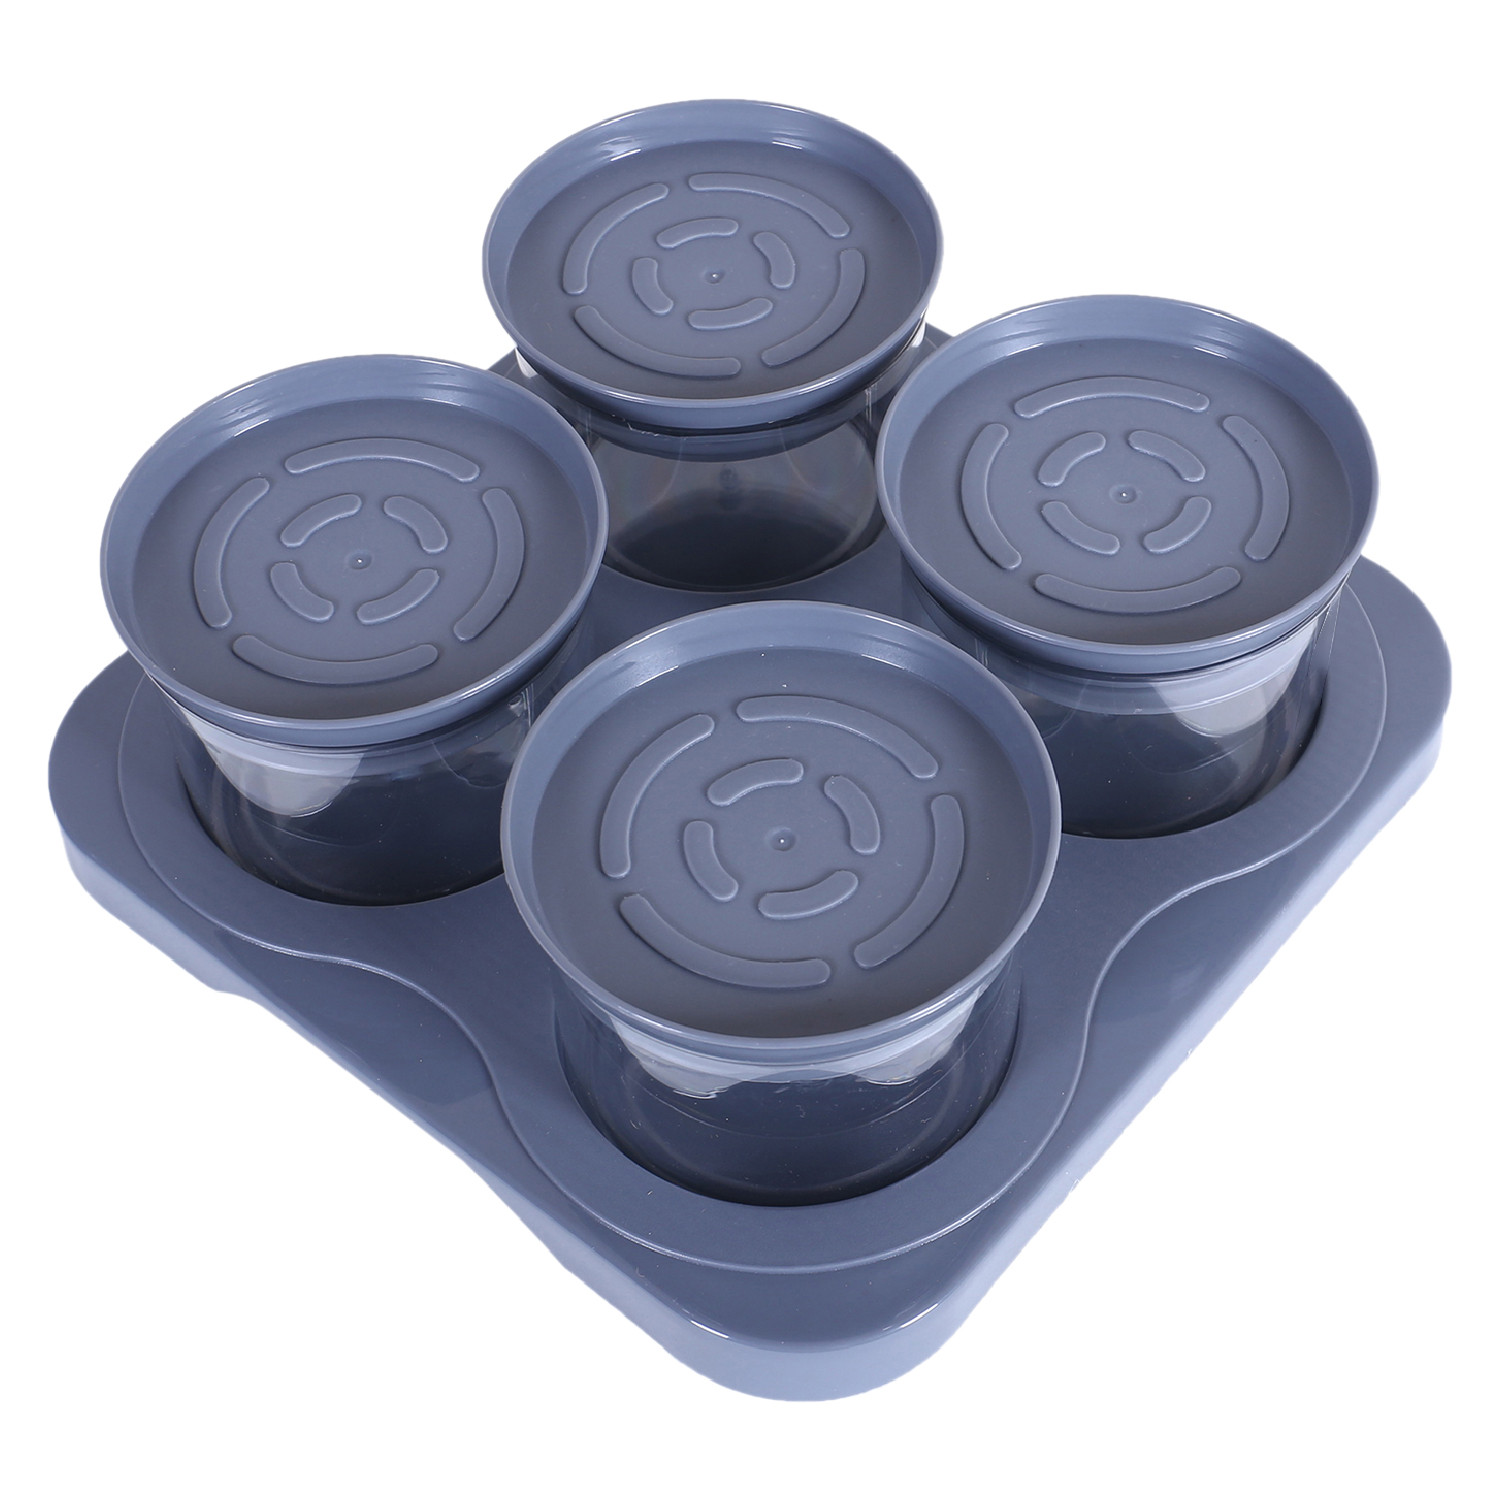 Kuber Industries 4 Containers & Tray Set|Unbreakable Plastic Snackers,Cookies,Nuts Serving Tray|Airtight Containers with Lid,350 ml (Gray)